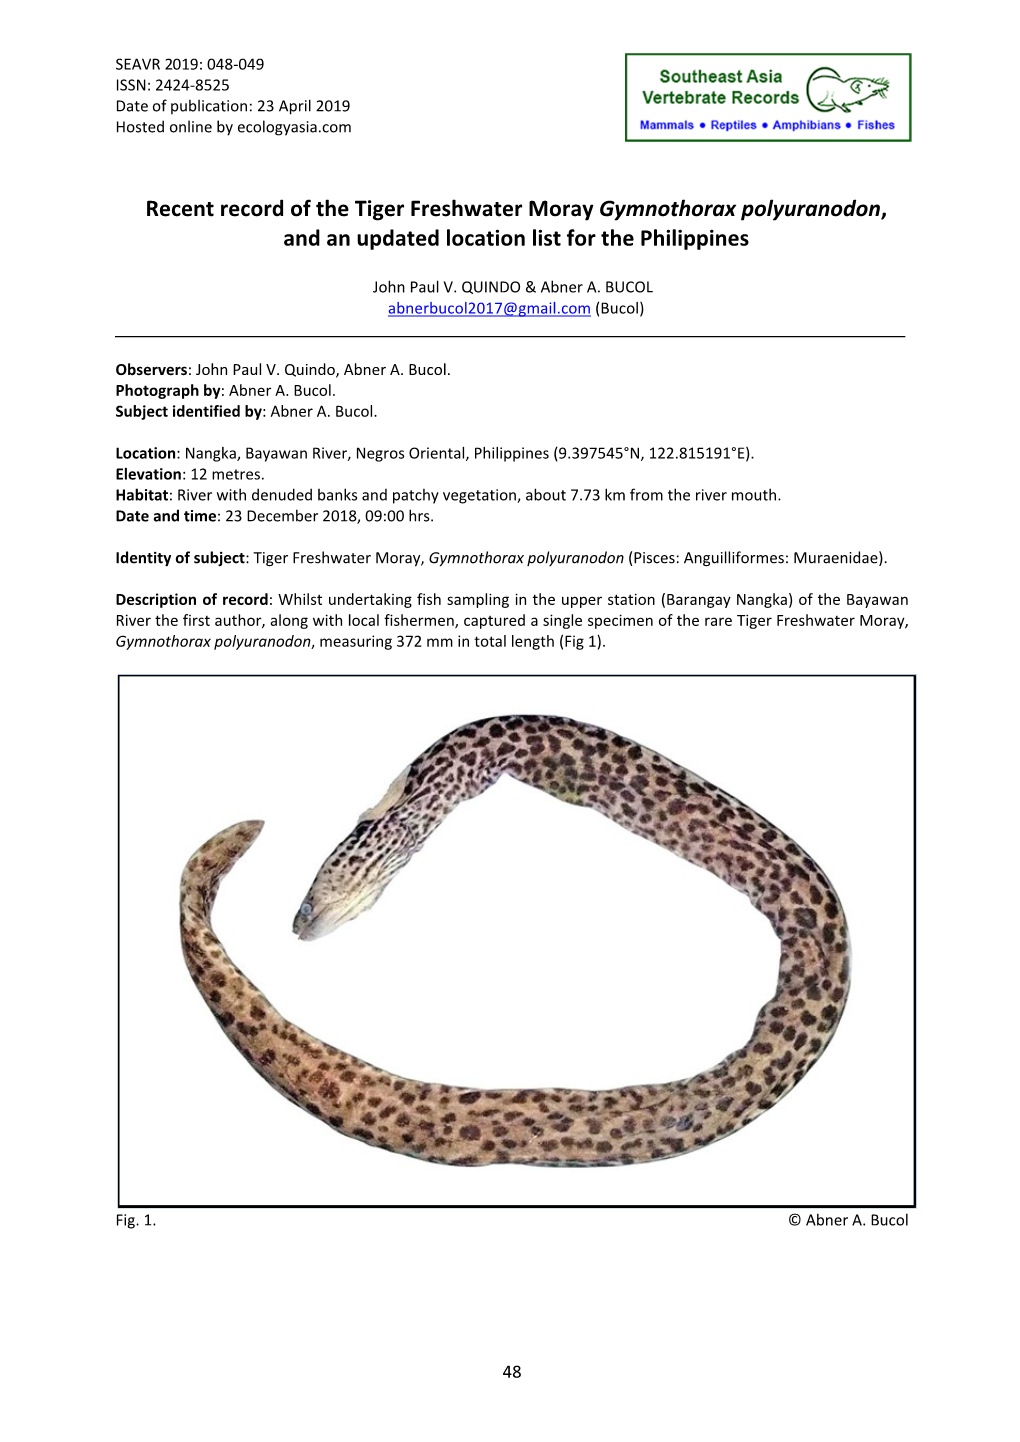 Recent Record of the Tiger Freshwater Moray Gymnothorax Polyuranodon, and an Updated Location List for the Philippines